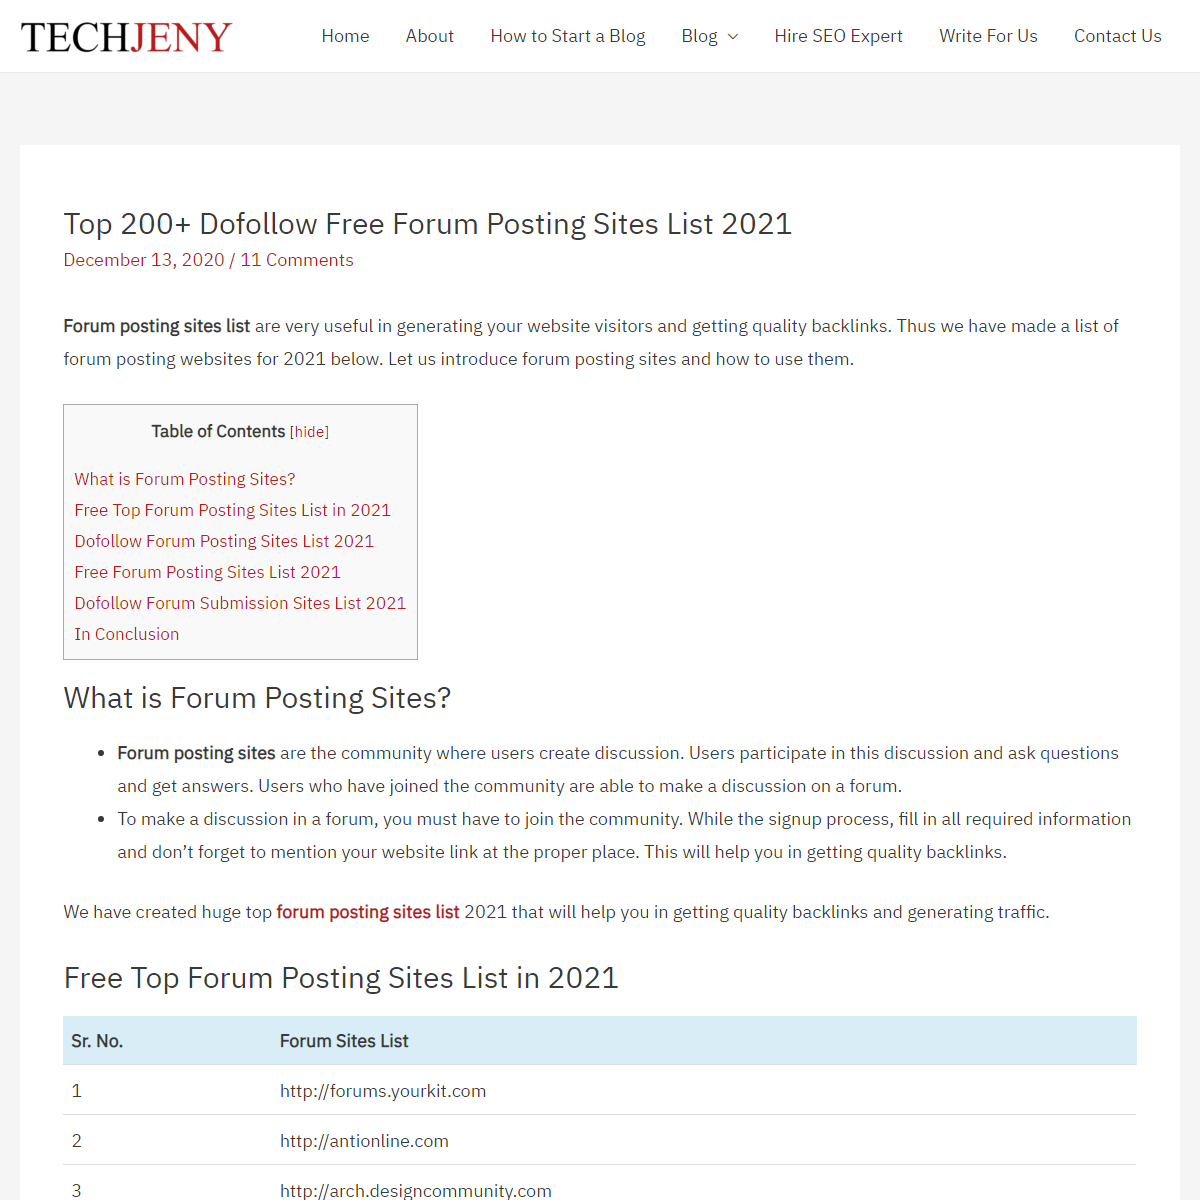 A complete backup of https://www.techjeny.org/dofollow-free-forum-posting-sites-list/